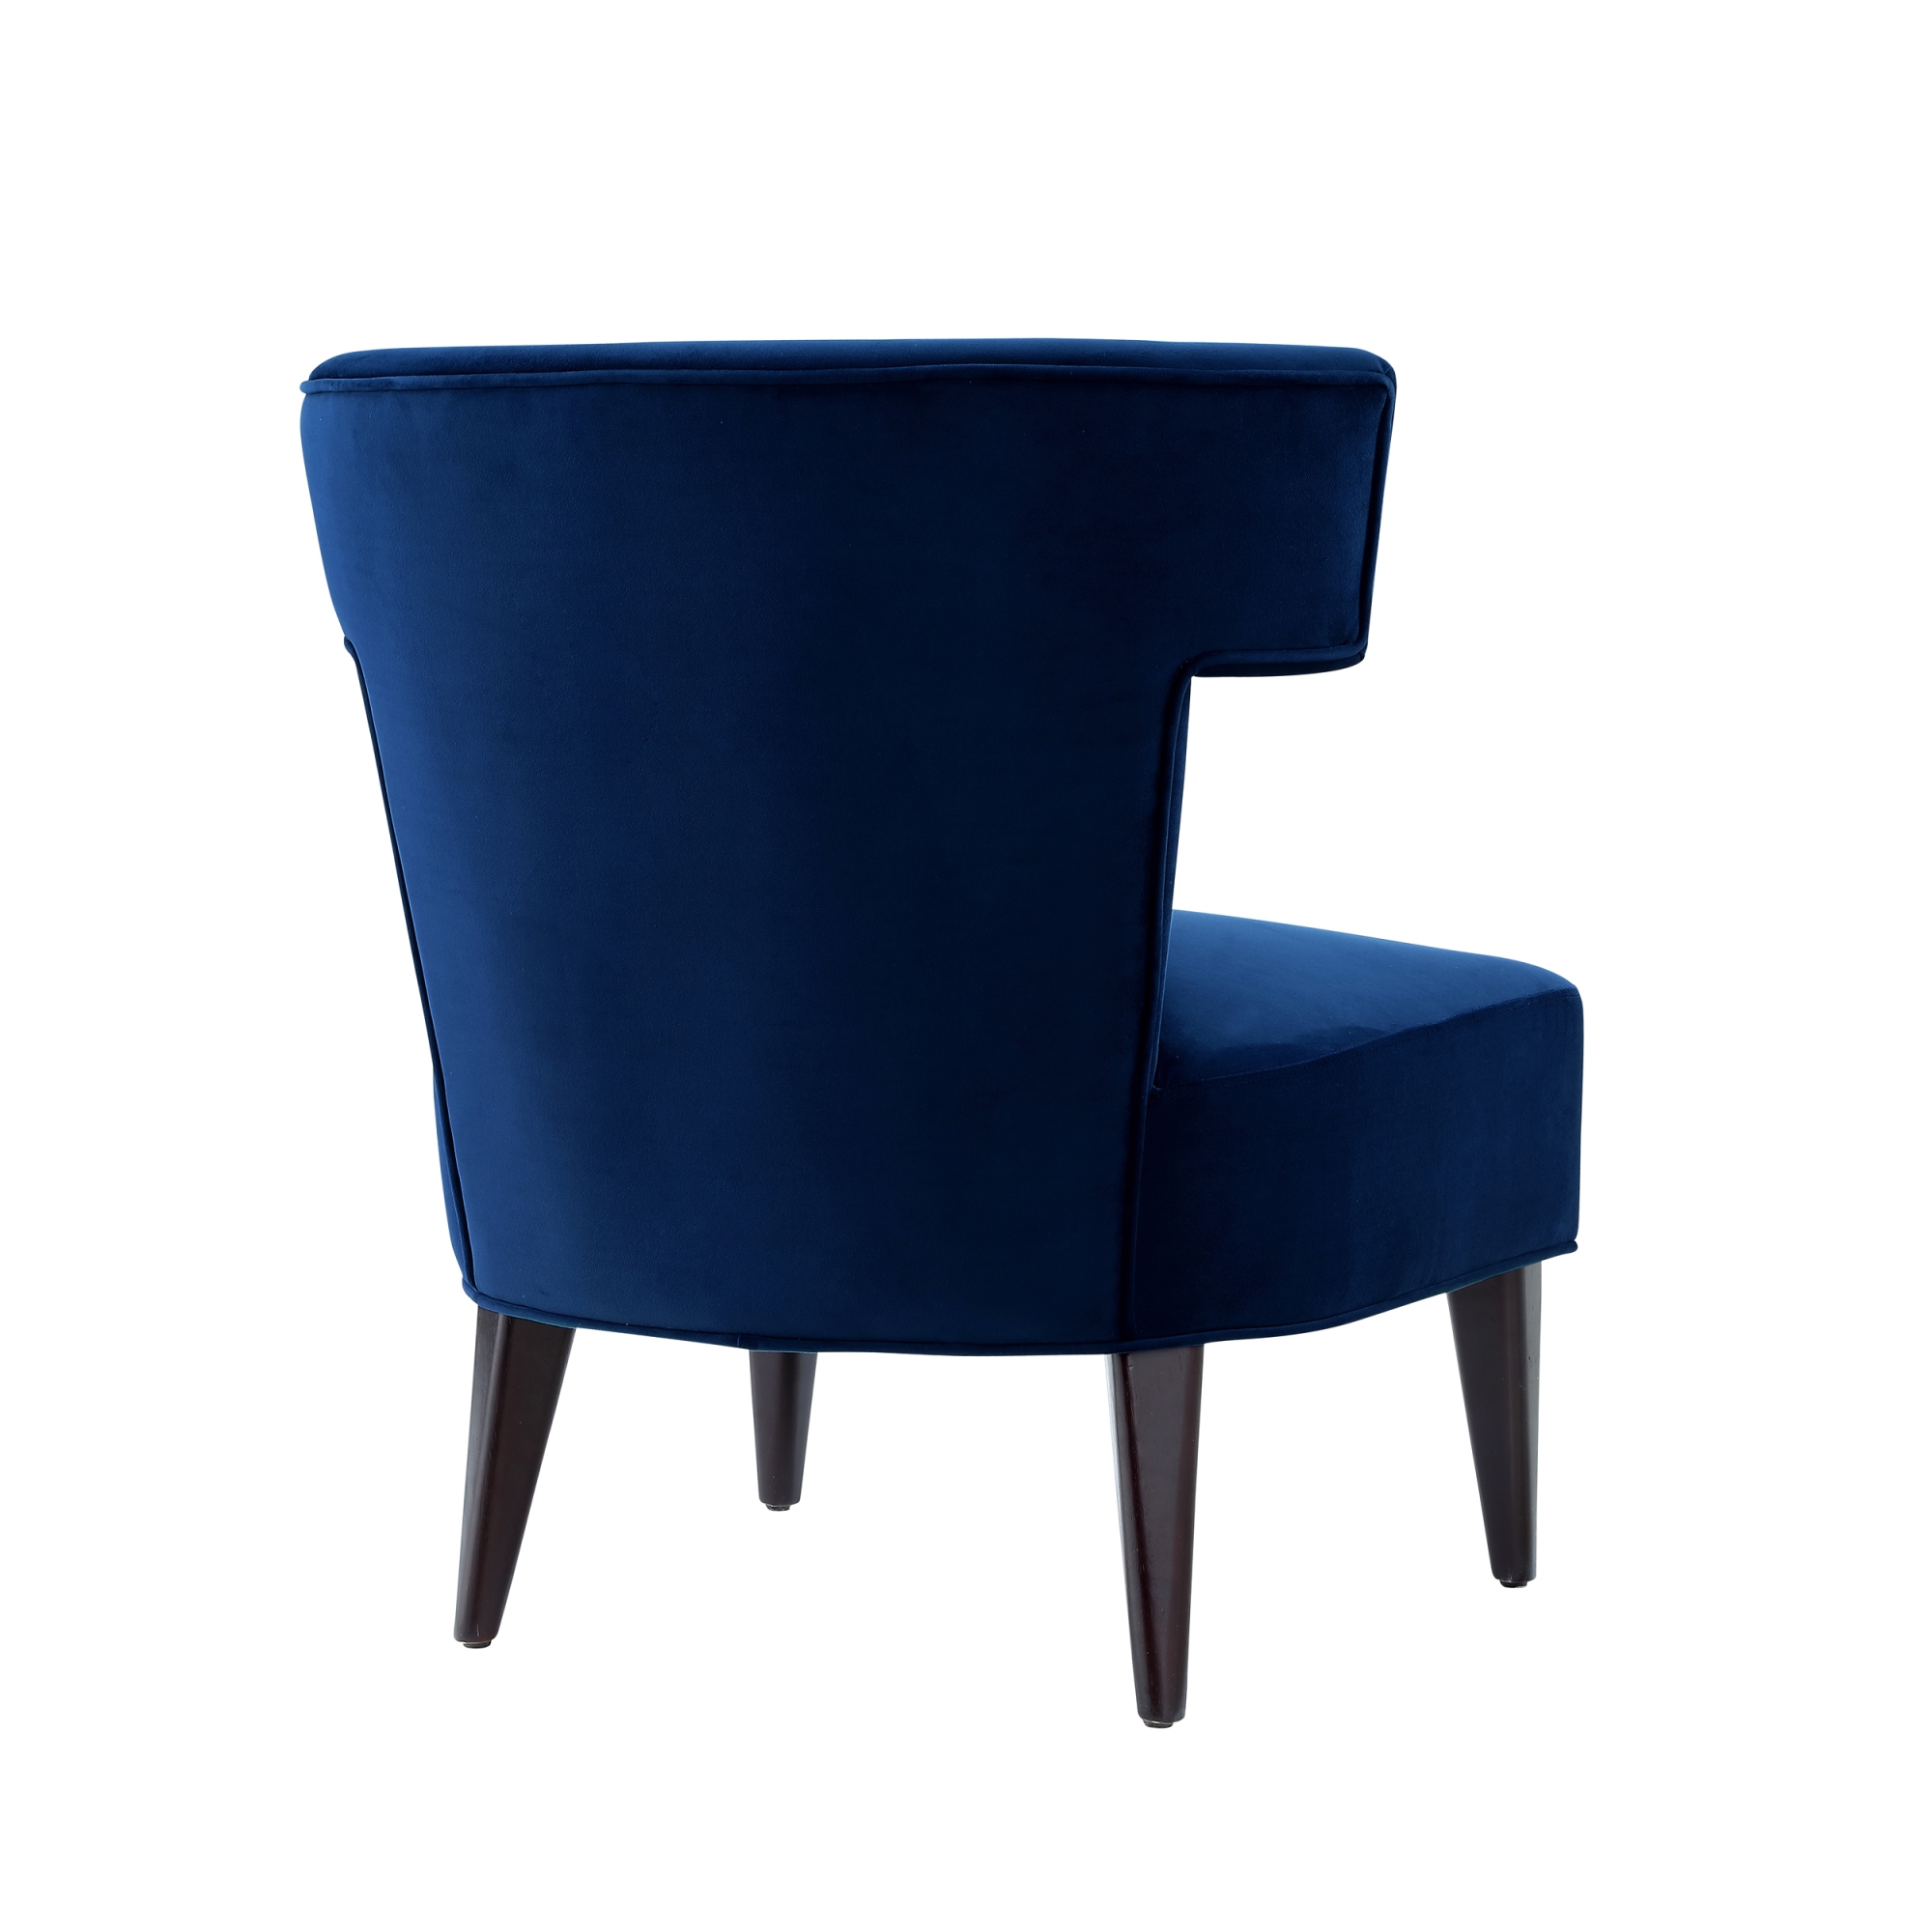 Nicole Miller Azariah Accent Chair, Nicole Miller Dining Chairs